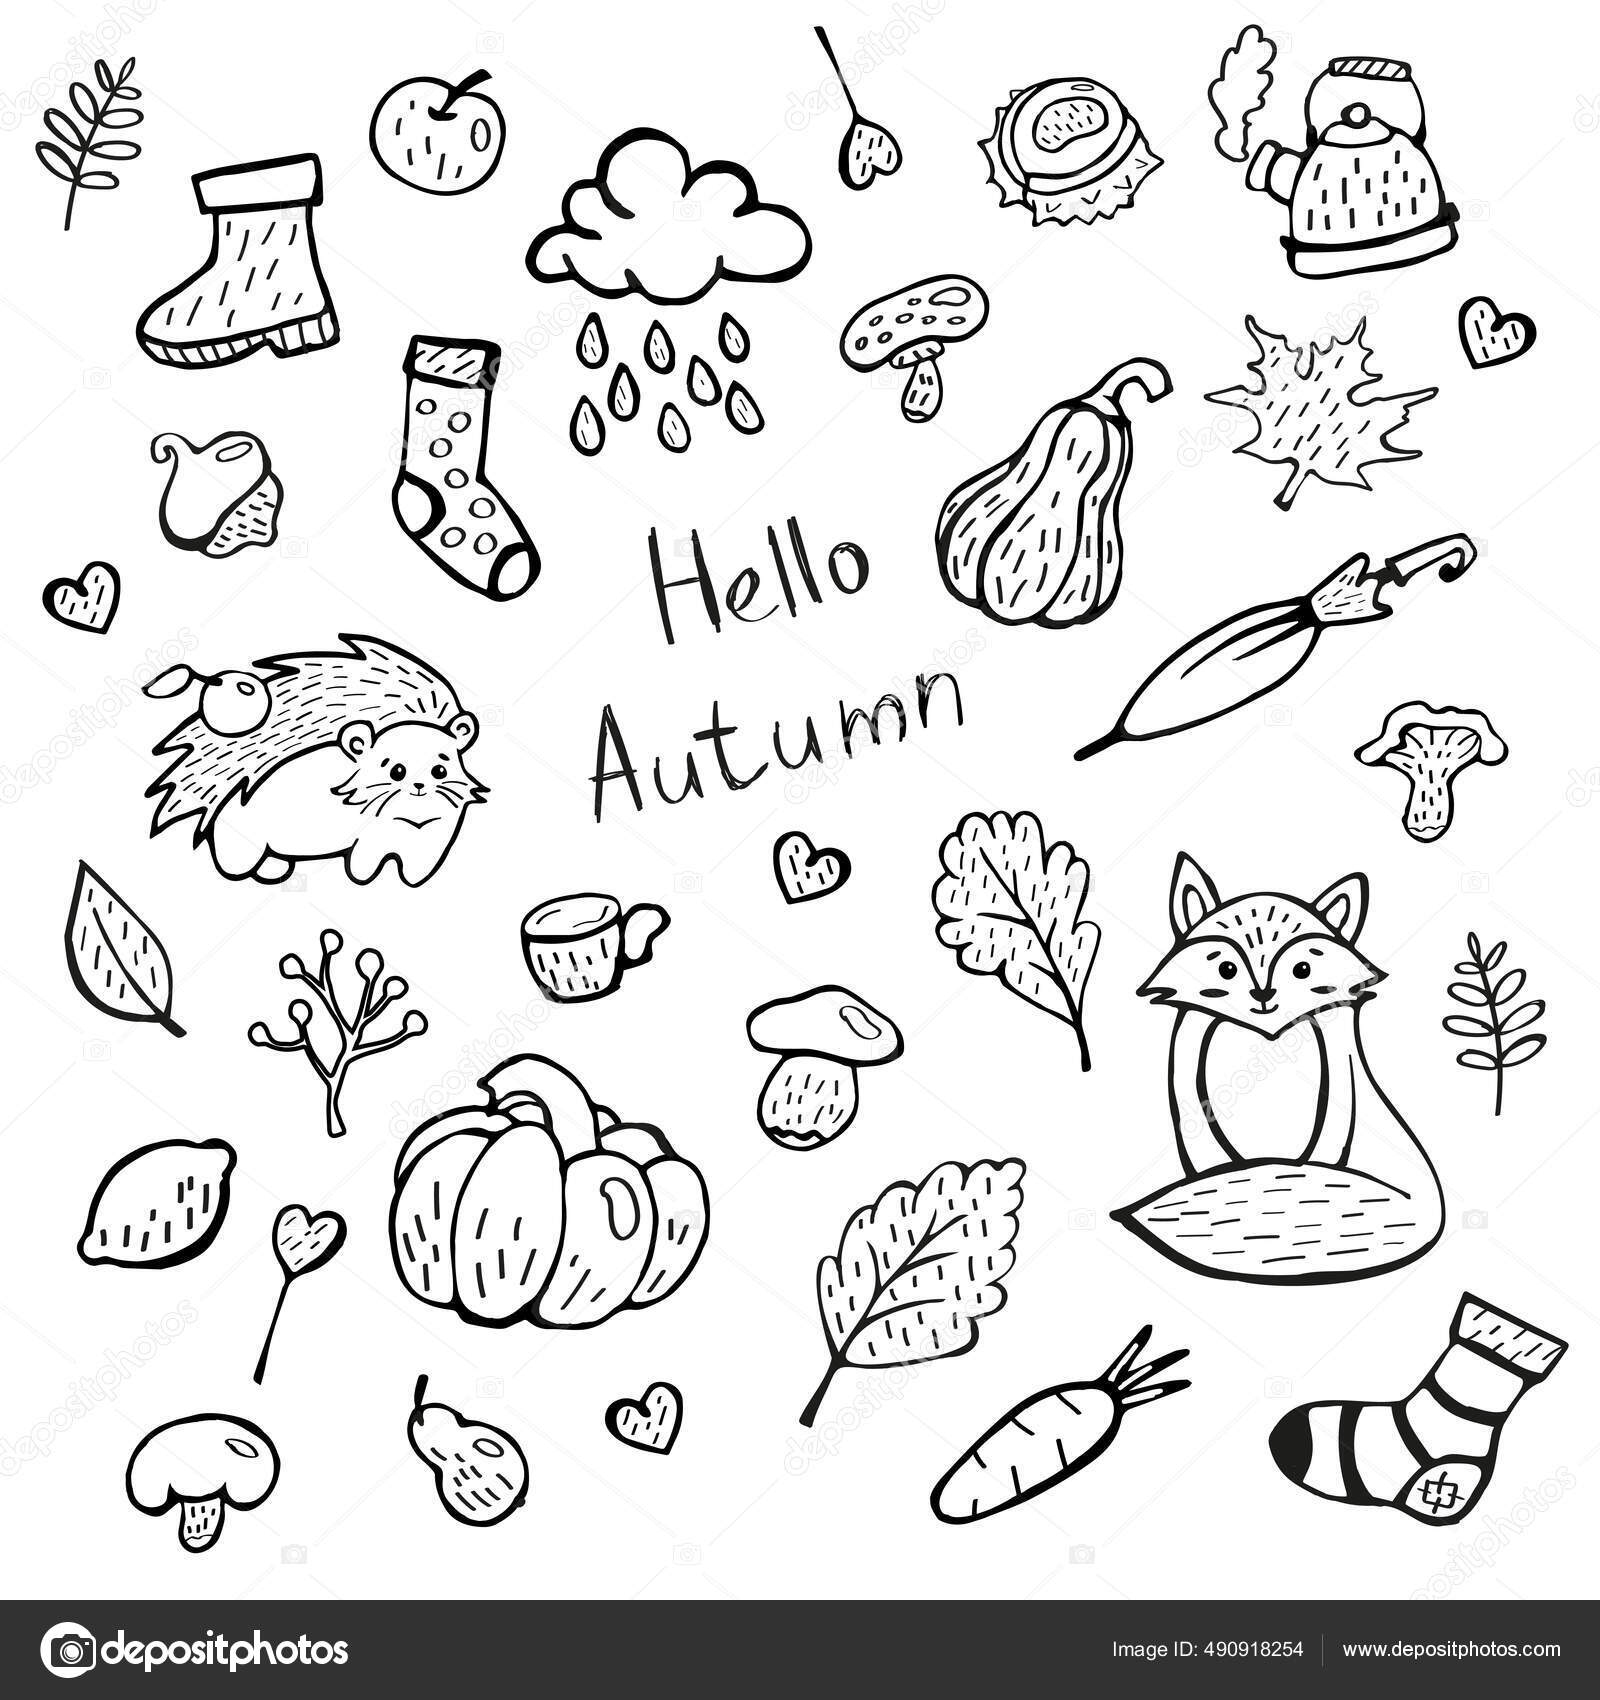 160742 Fall Sketches Images Stock Photos  Vectors  Shutterstock